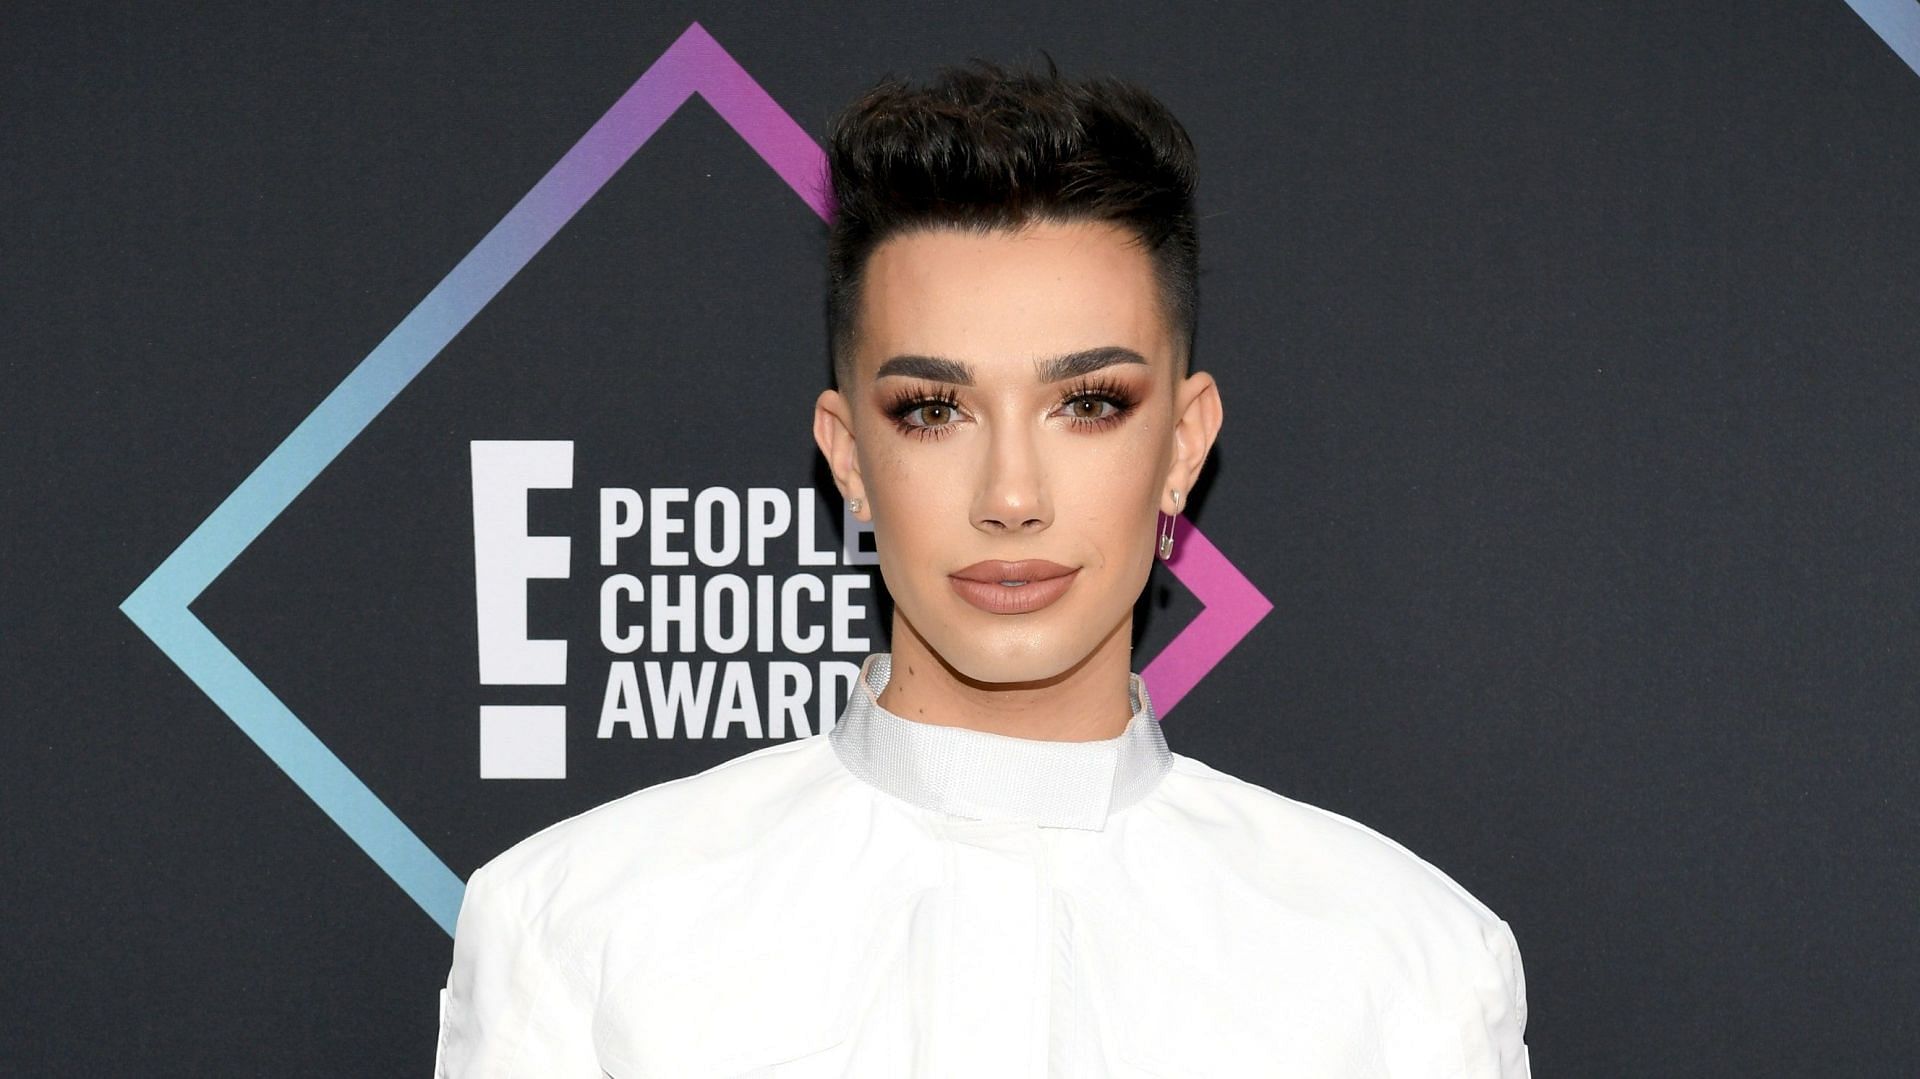 James Charles trolled for reacting to hate comment on his video (Image via Getty Images)